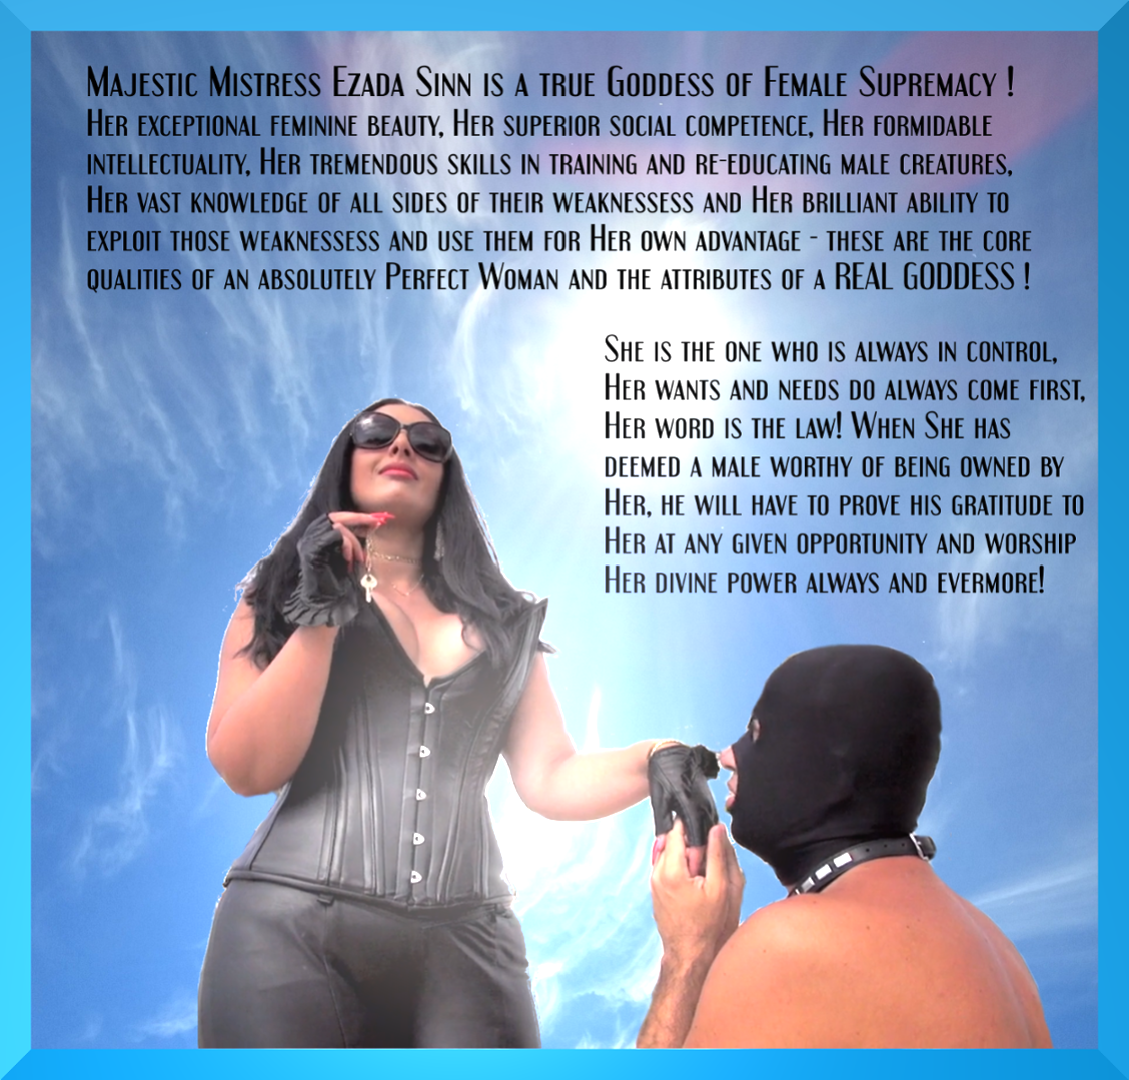 Photo by sluga0201 with the username @sluga0201,  December 24, 2019 at 9:11 AM. The post is about the topic Praising the Power of Matriarch Ezada Sinn